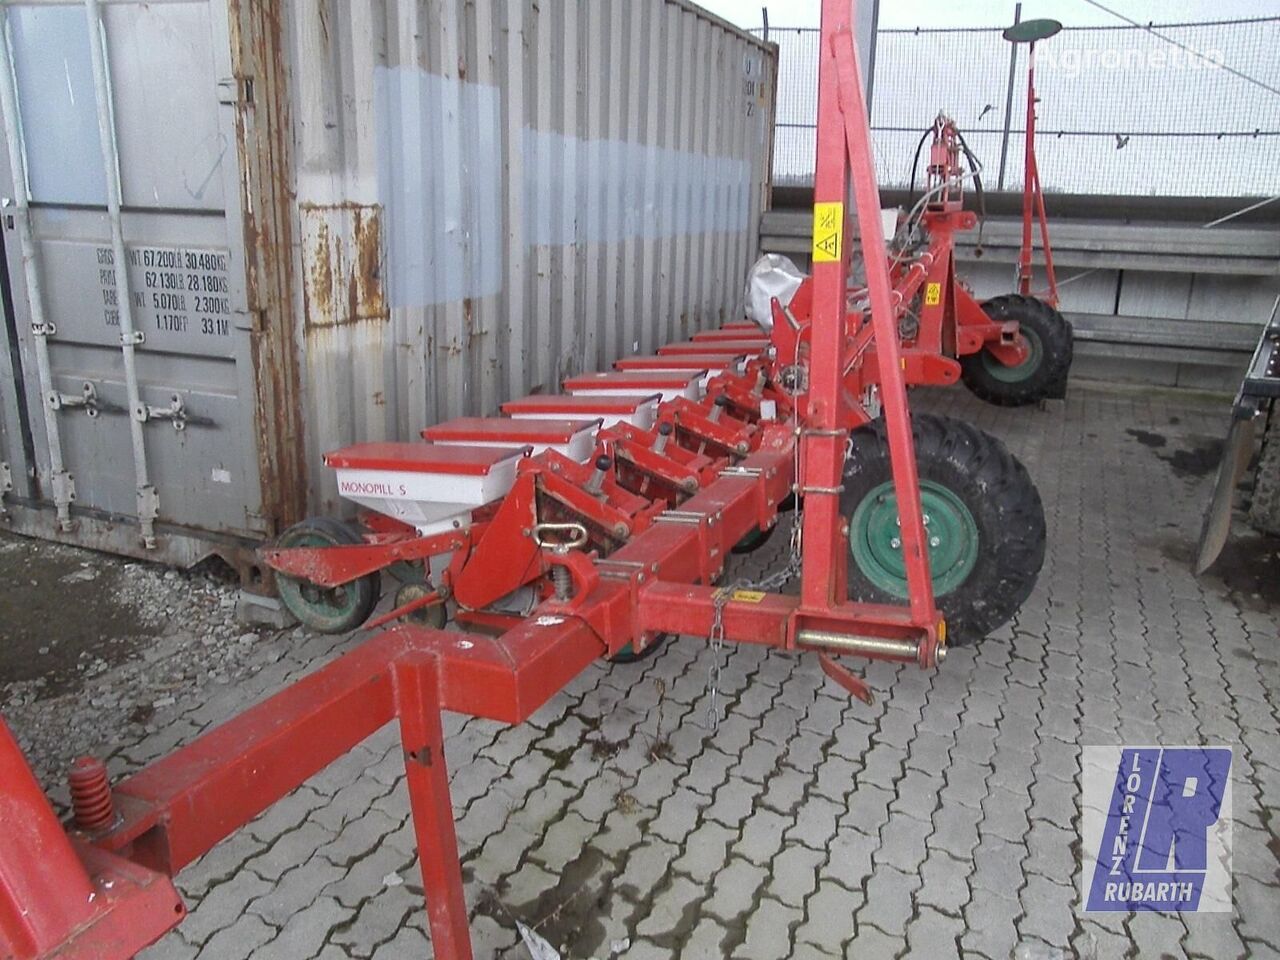 Weiste MONOPILL S 12 pneumatic precision seed drill